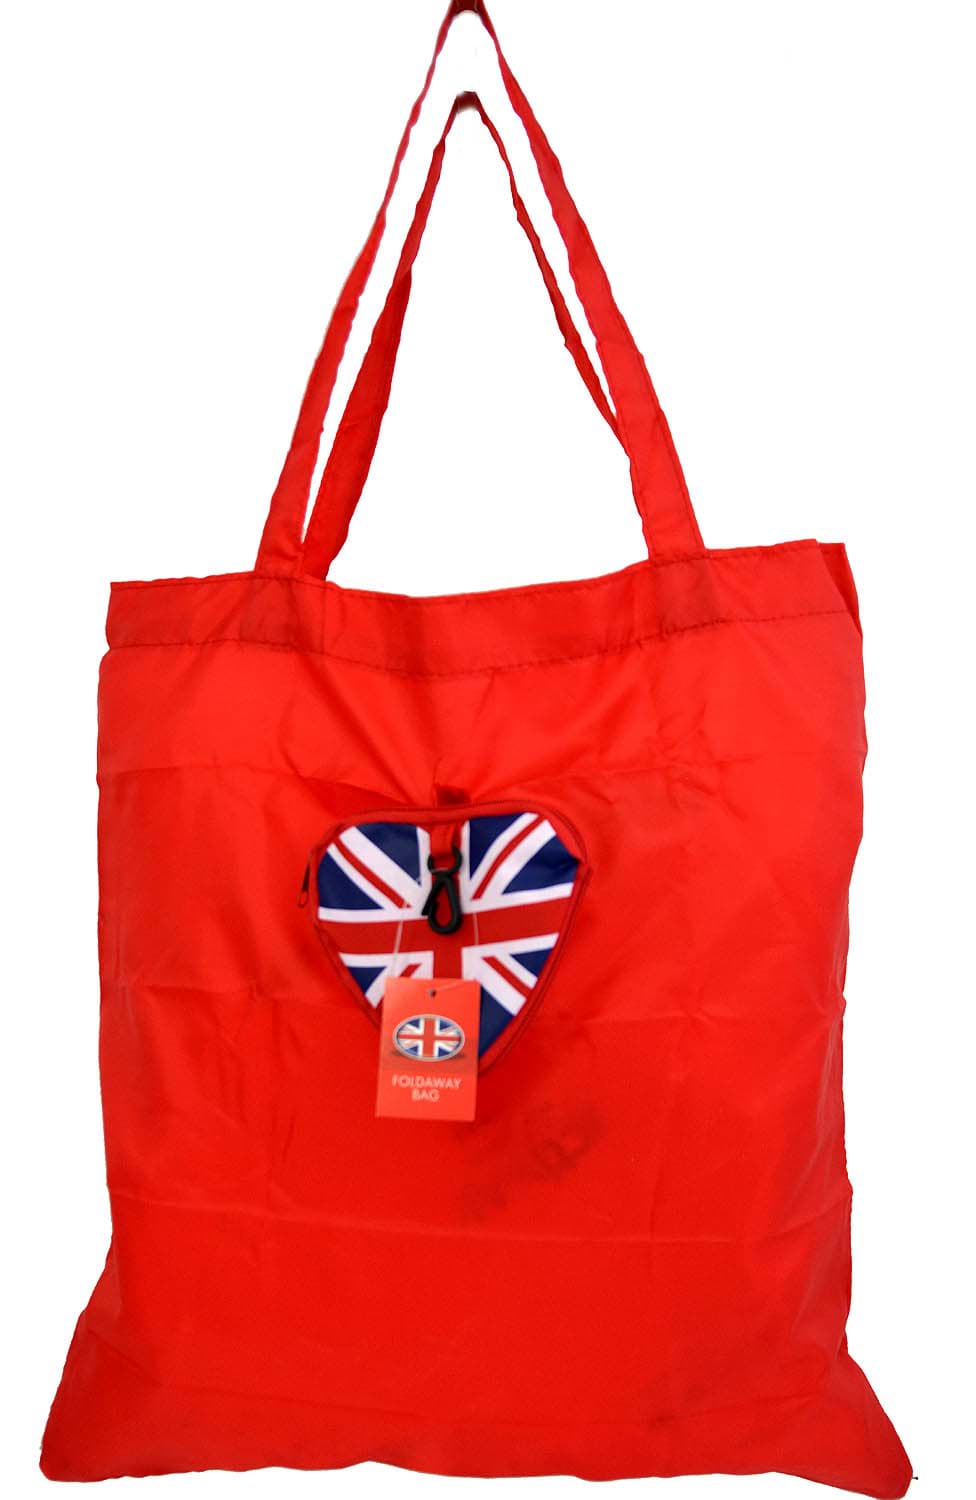 Picture of Foldaway Union Jack Shopping Bag